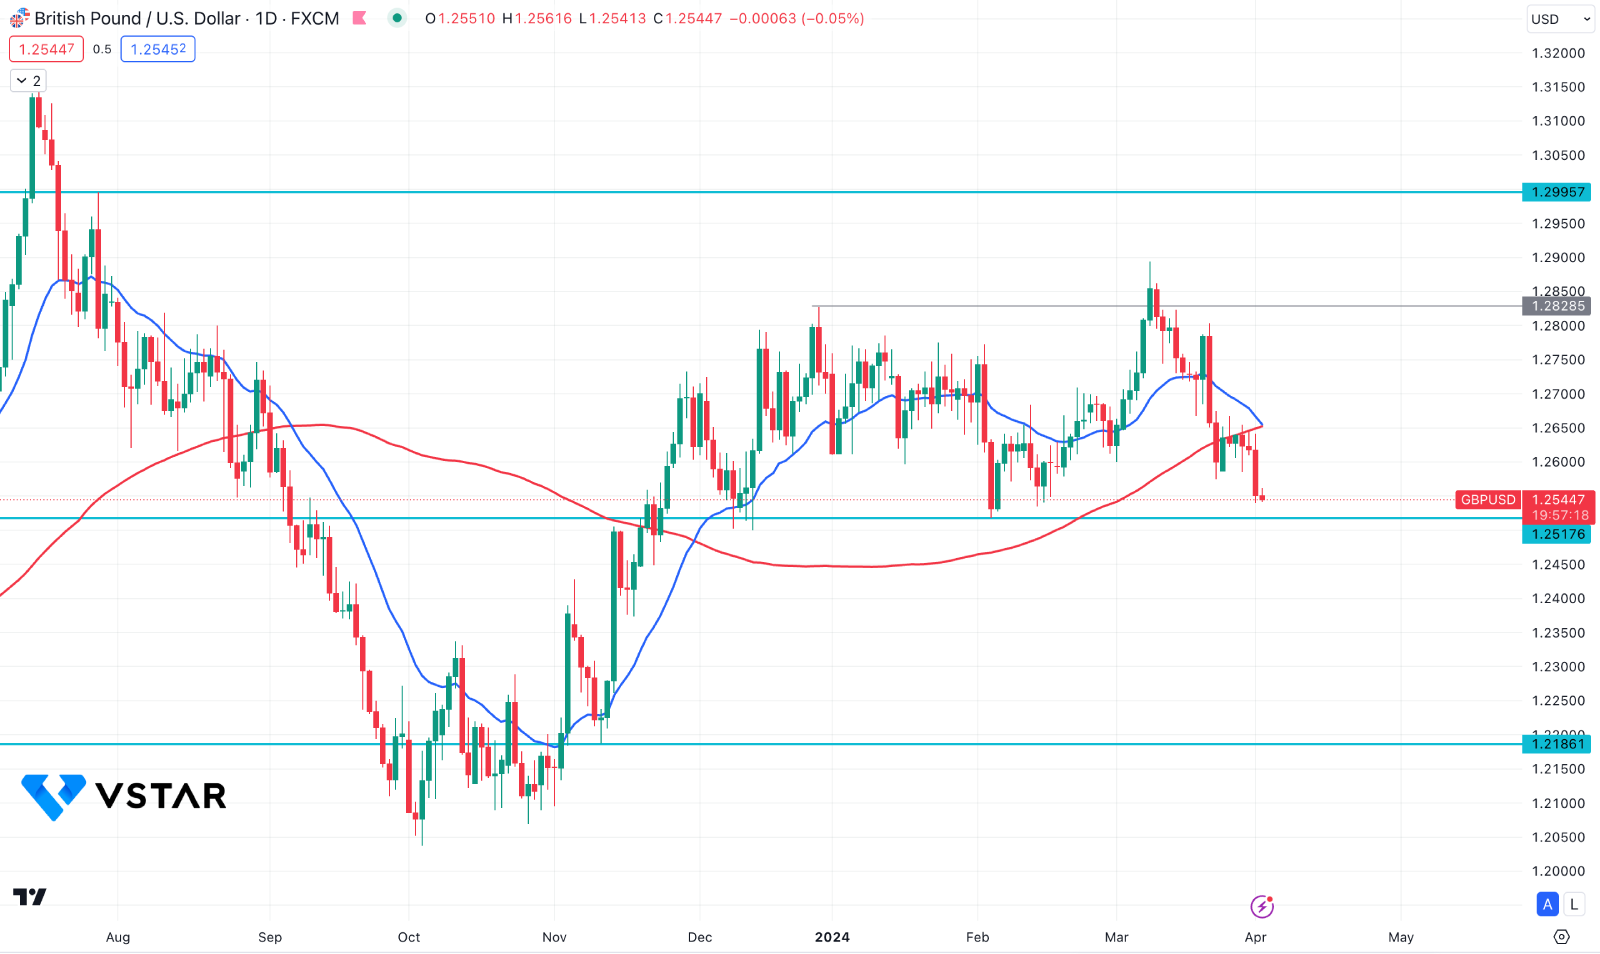 gbp-usd-looks-vulnerable-above-key-support-level